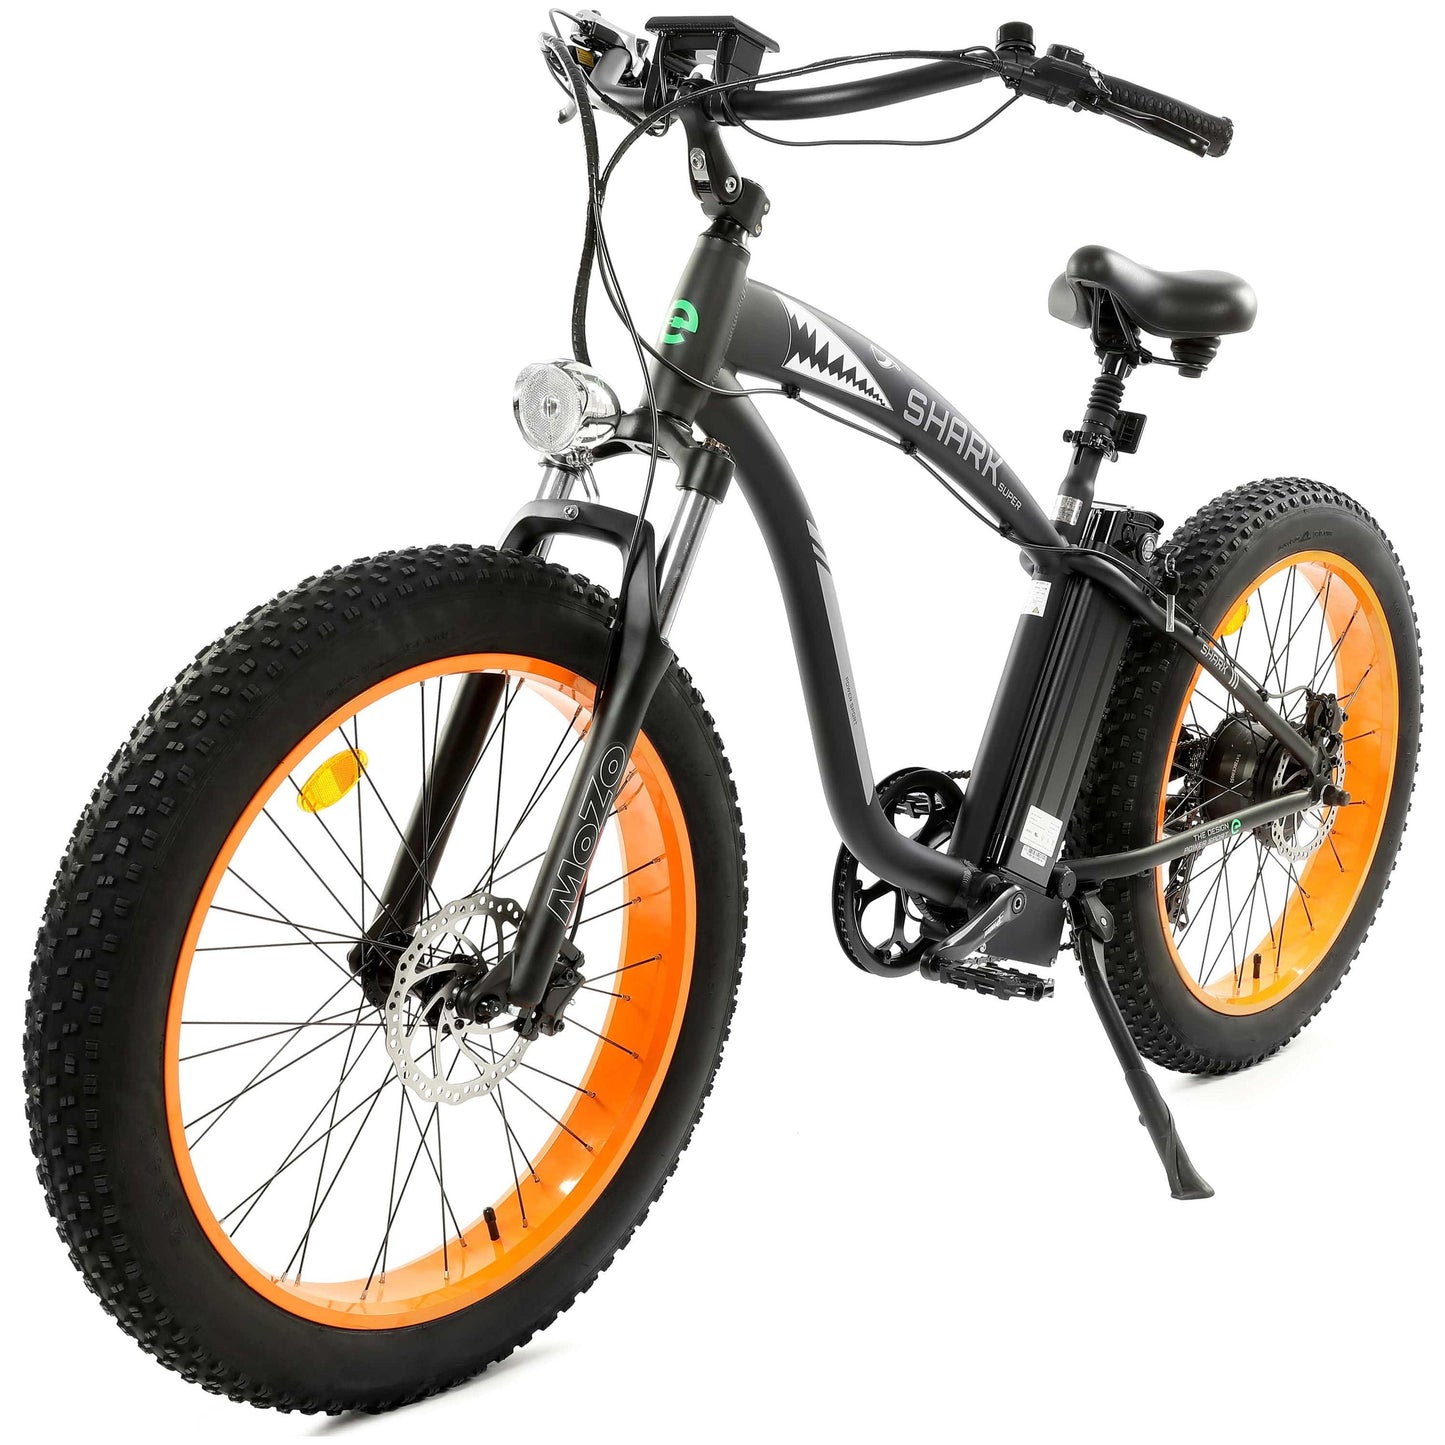 Ecotric ebikes Orange rims UL Certified-Ecotric Hammer Electric Fat Tire Beach Snow Bike